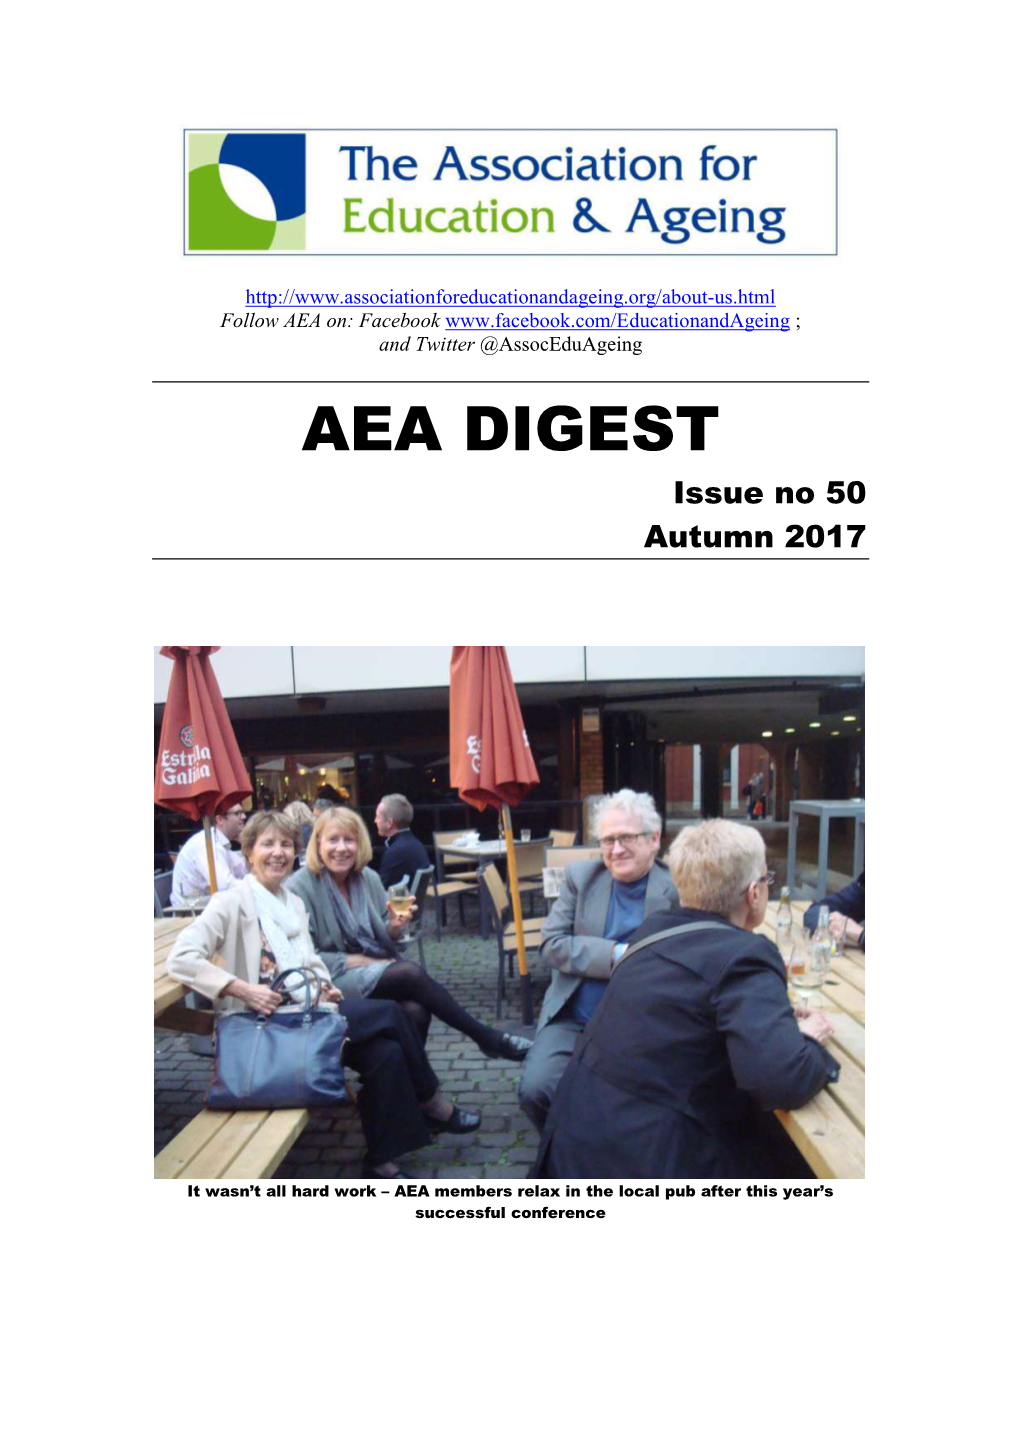 AEA DIGEST Issue No 50 Autumn 2017